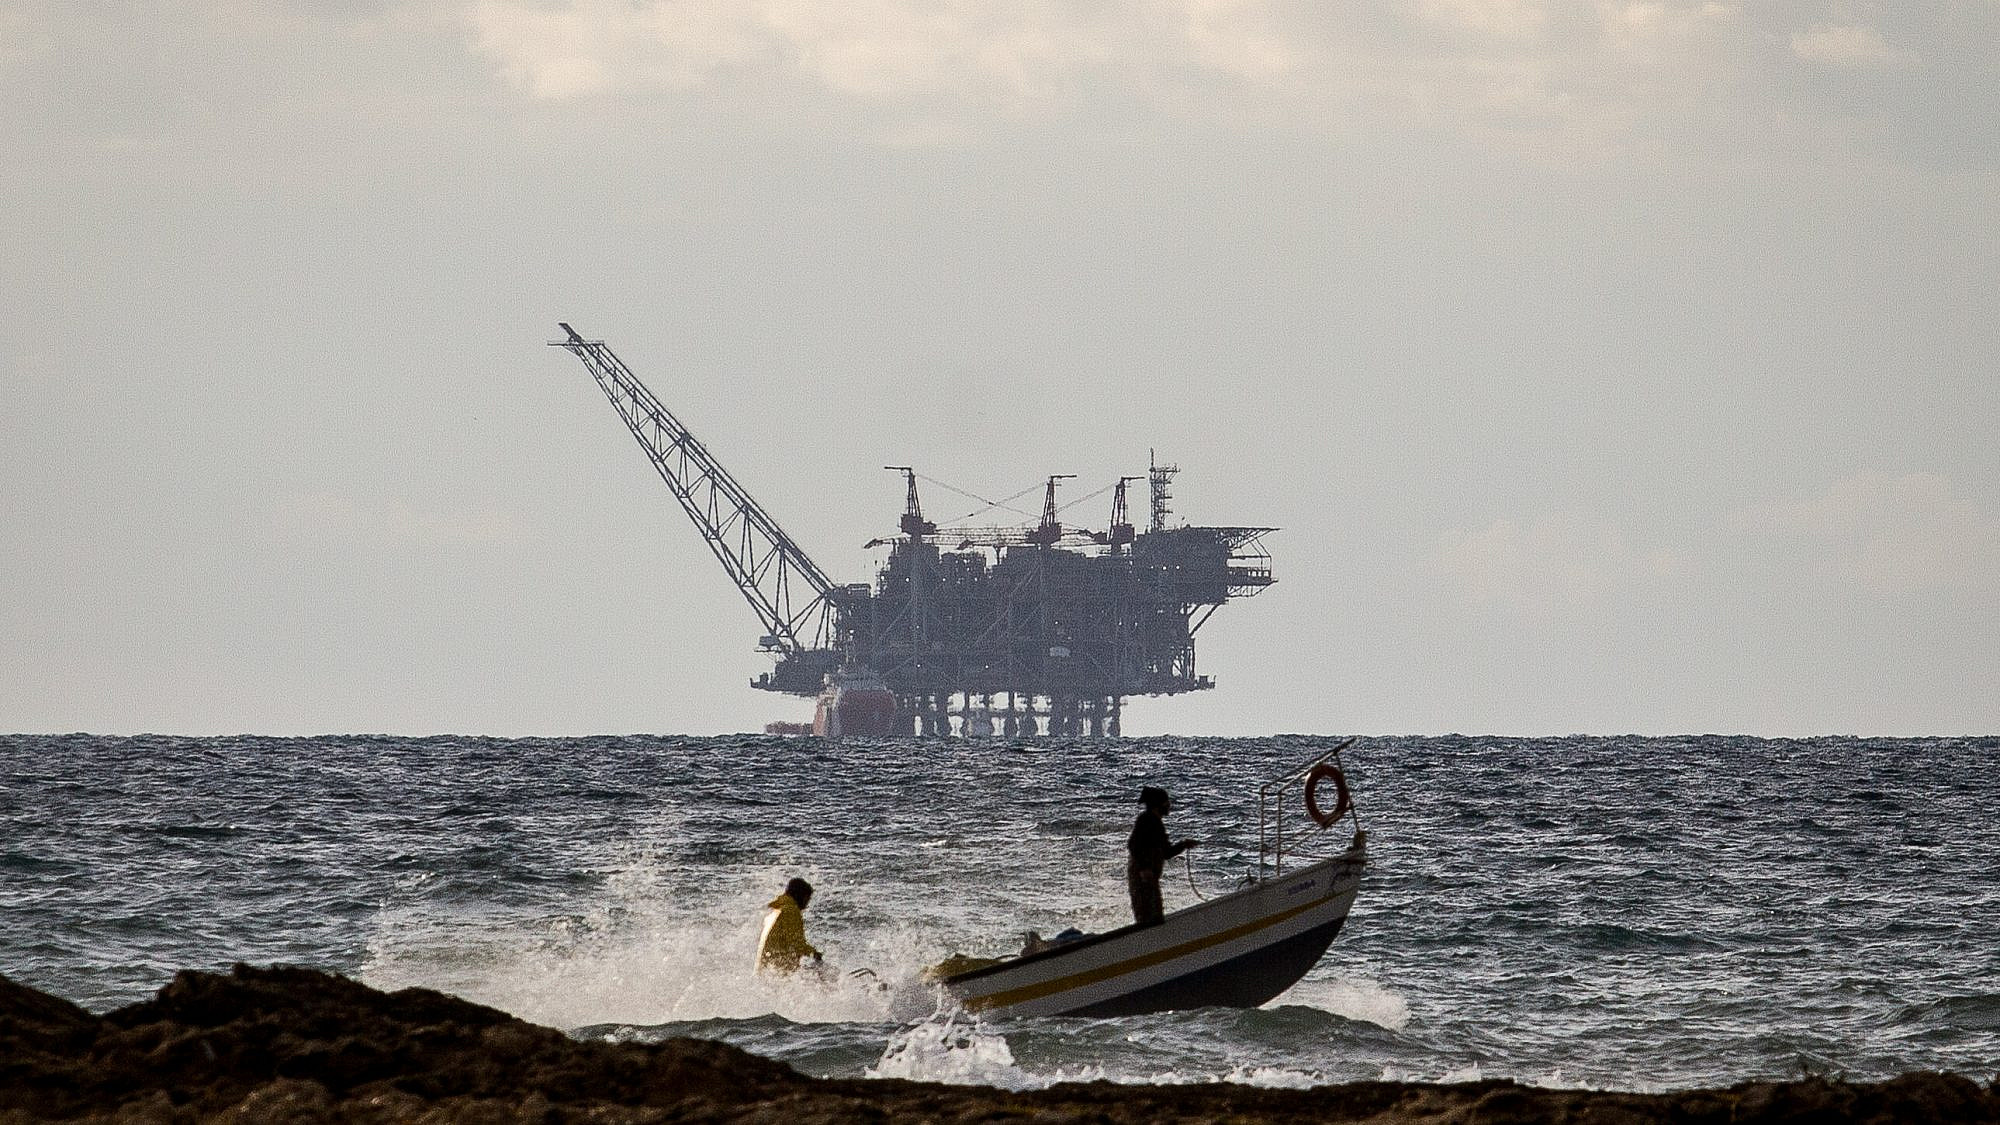 Israel's Leviathan gas processing rig as seen from the Dor Habonim Beach Nature Reserve, Jan. 1, 2020. Credit: Flash90.